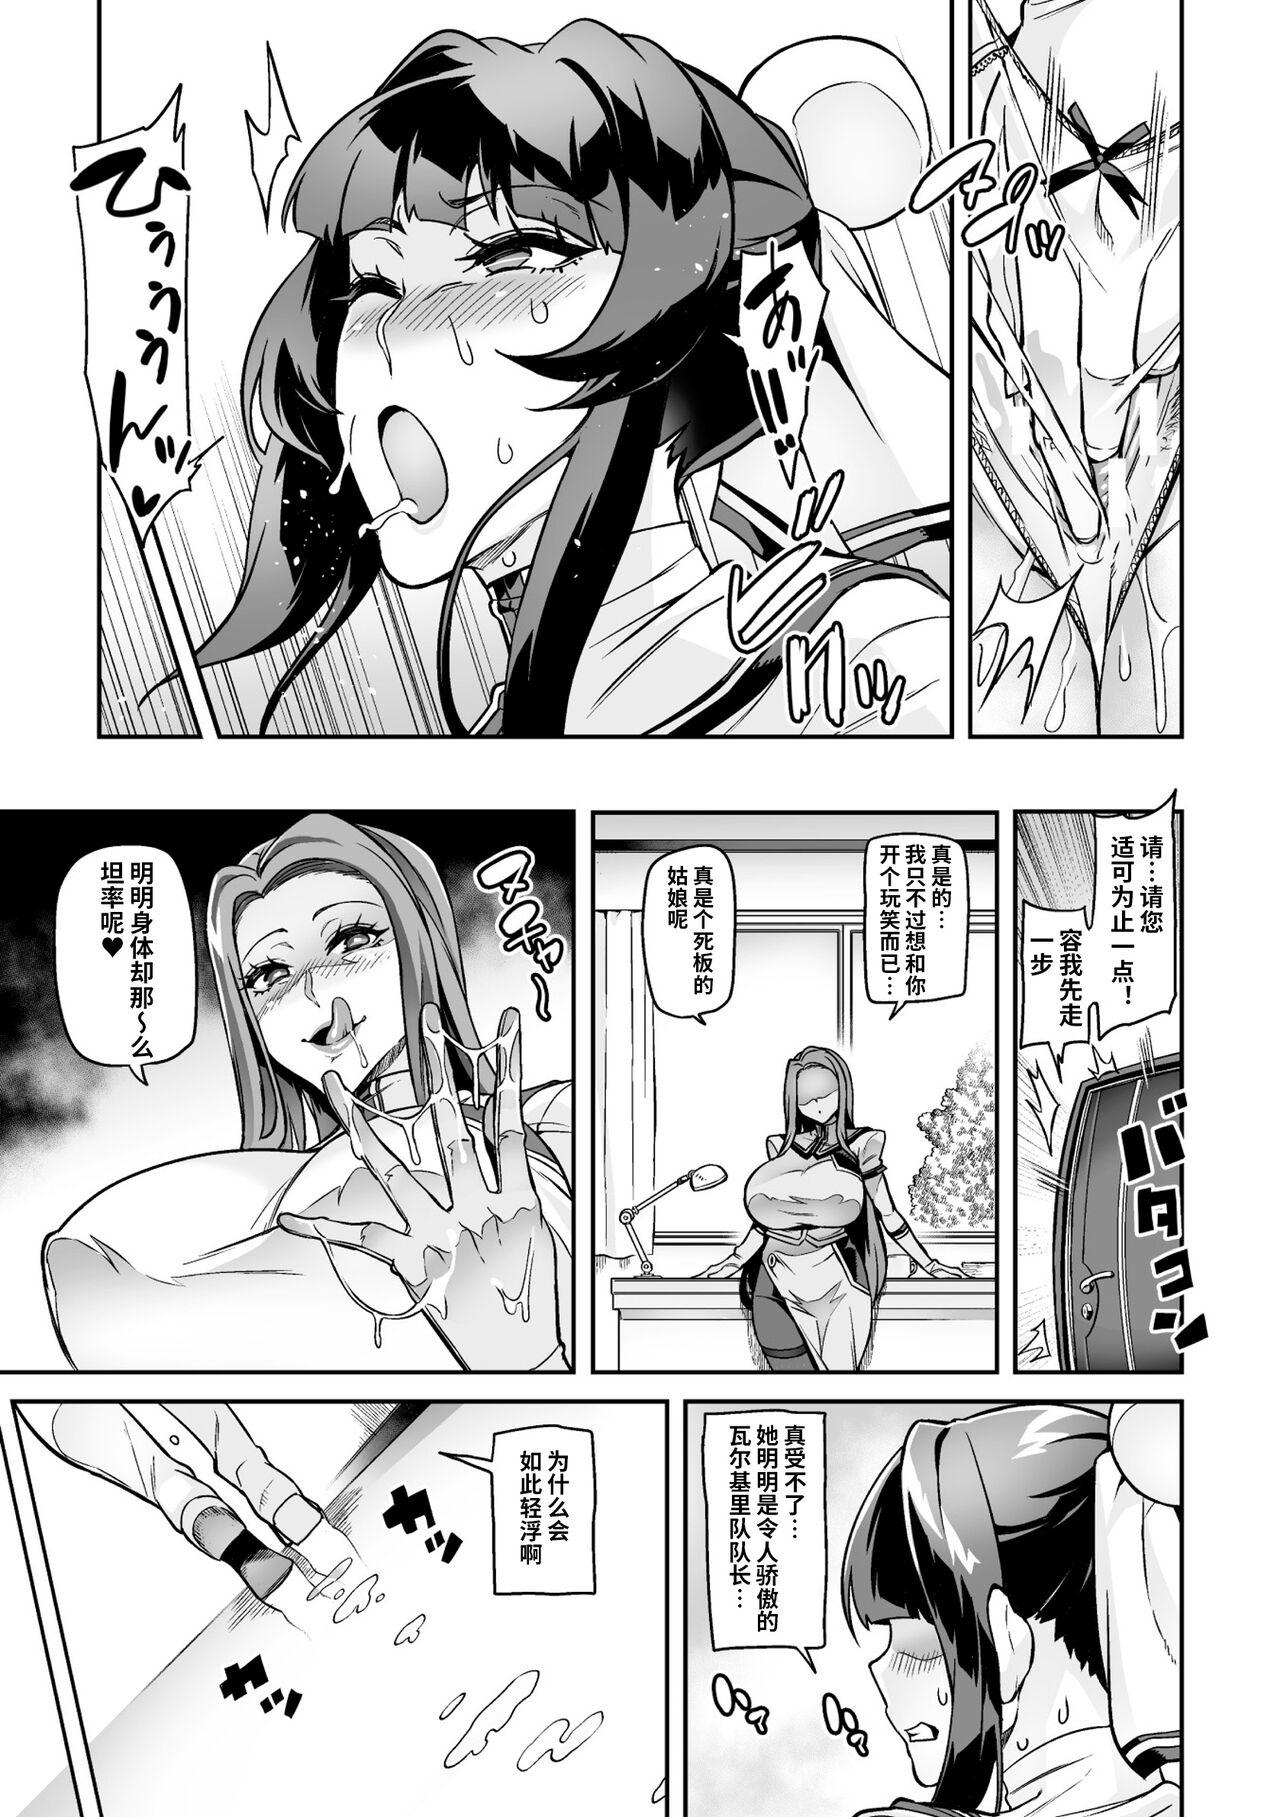 Face Sitting Youkoso! Inma Shoukan Arcadia Ego Ch. 2 Scene - Page 4